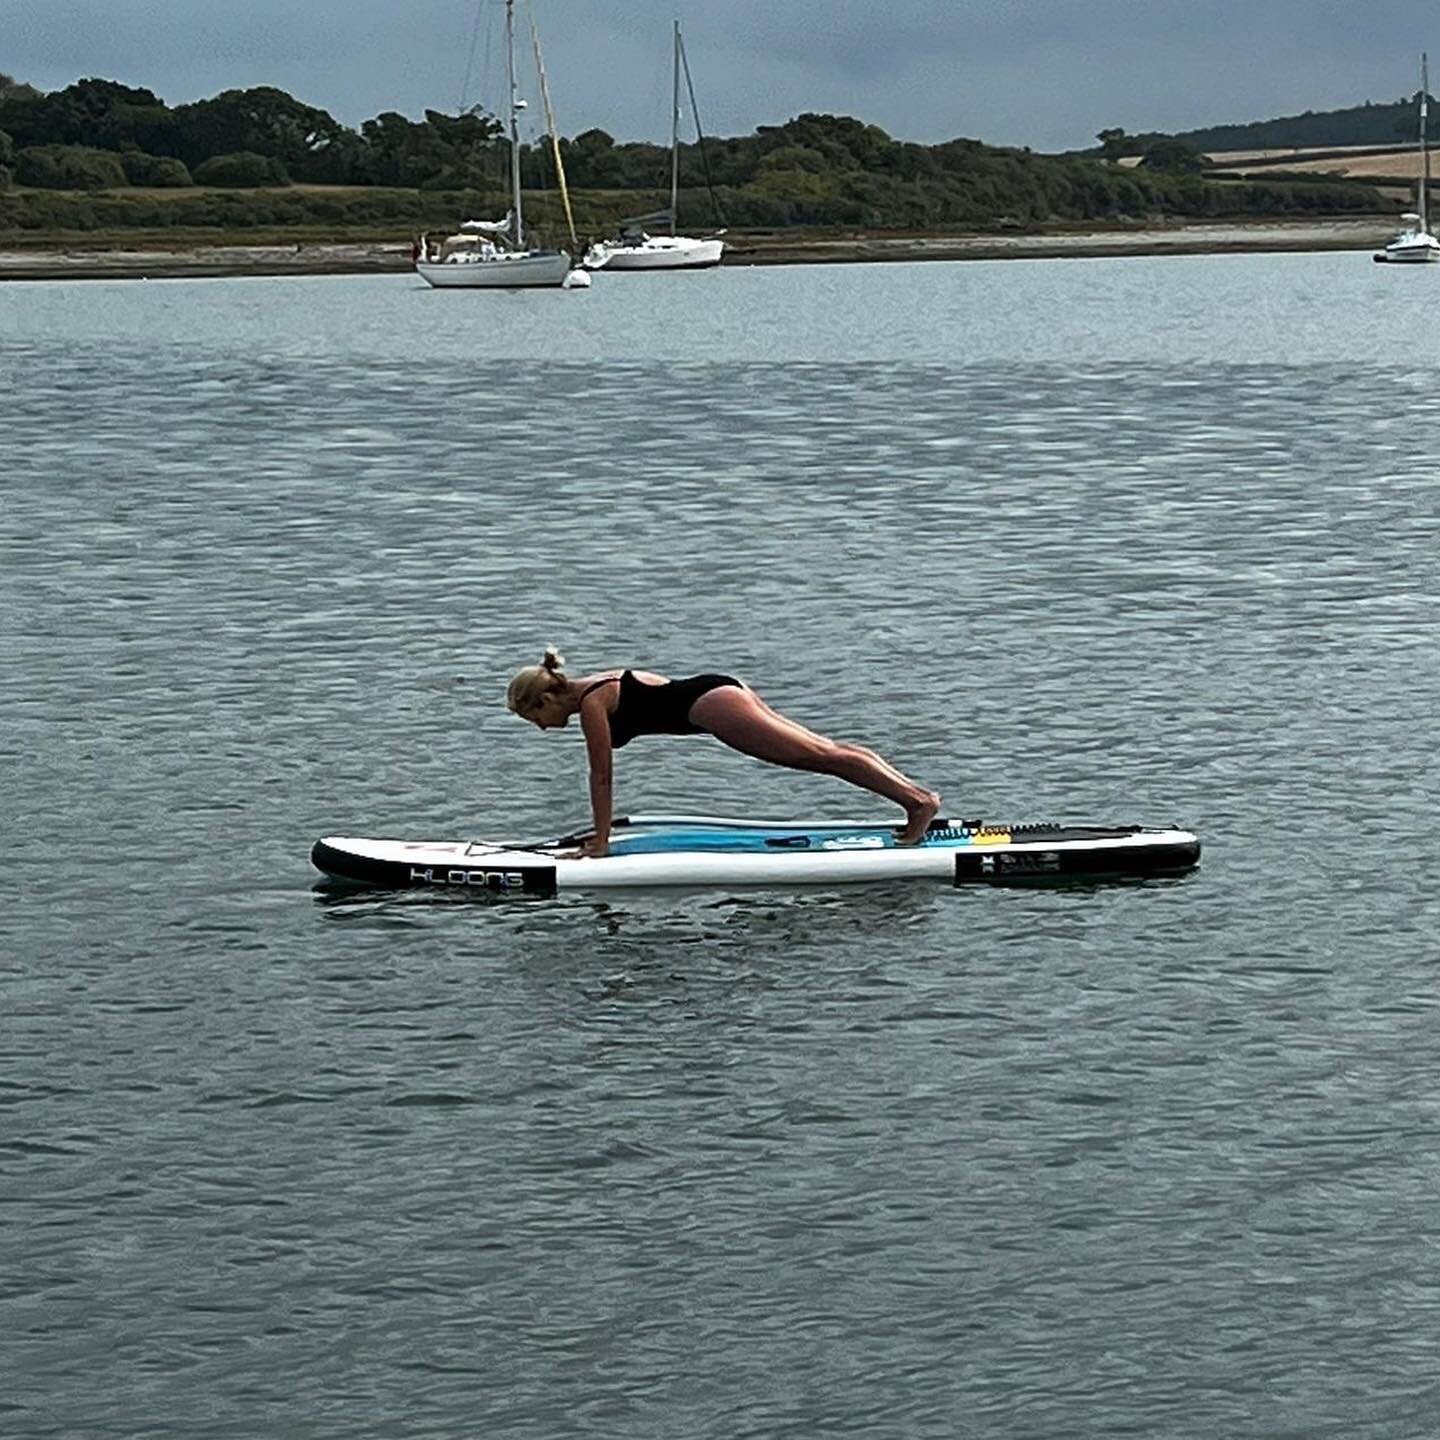 Saturday morning through to Saturday night @thehutcolwell 

Just the best day

#paddleboardingpilates (I know it&rsquo;s not a thing!) #pilates #plank #paddleboarding  #pilateseveryday #iow #isleofwight @gilescjones